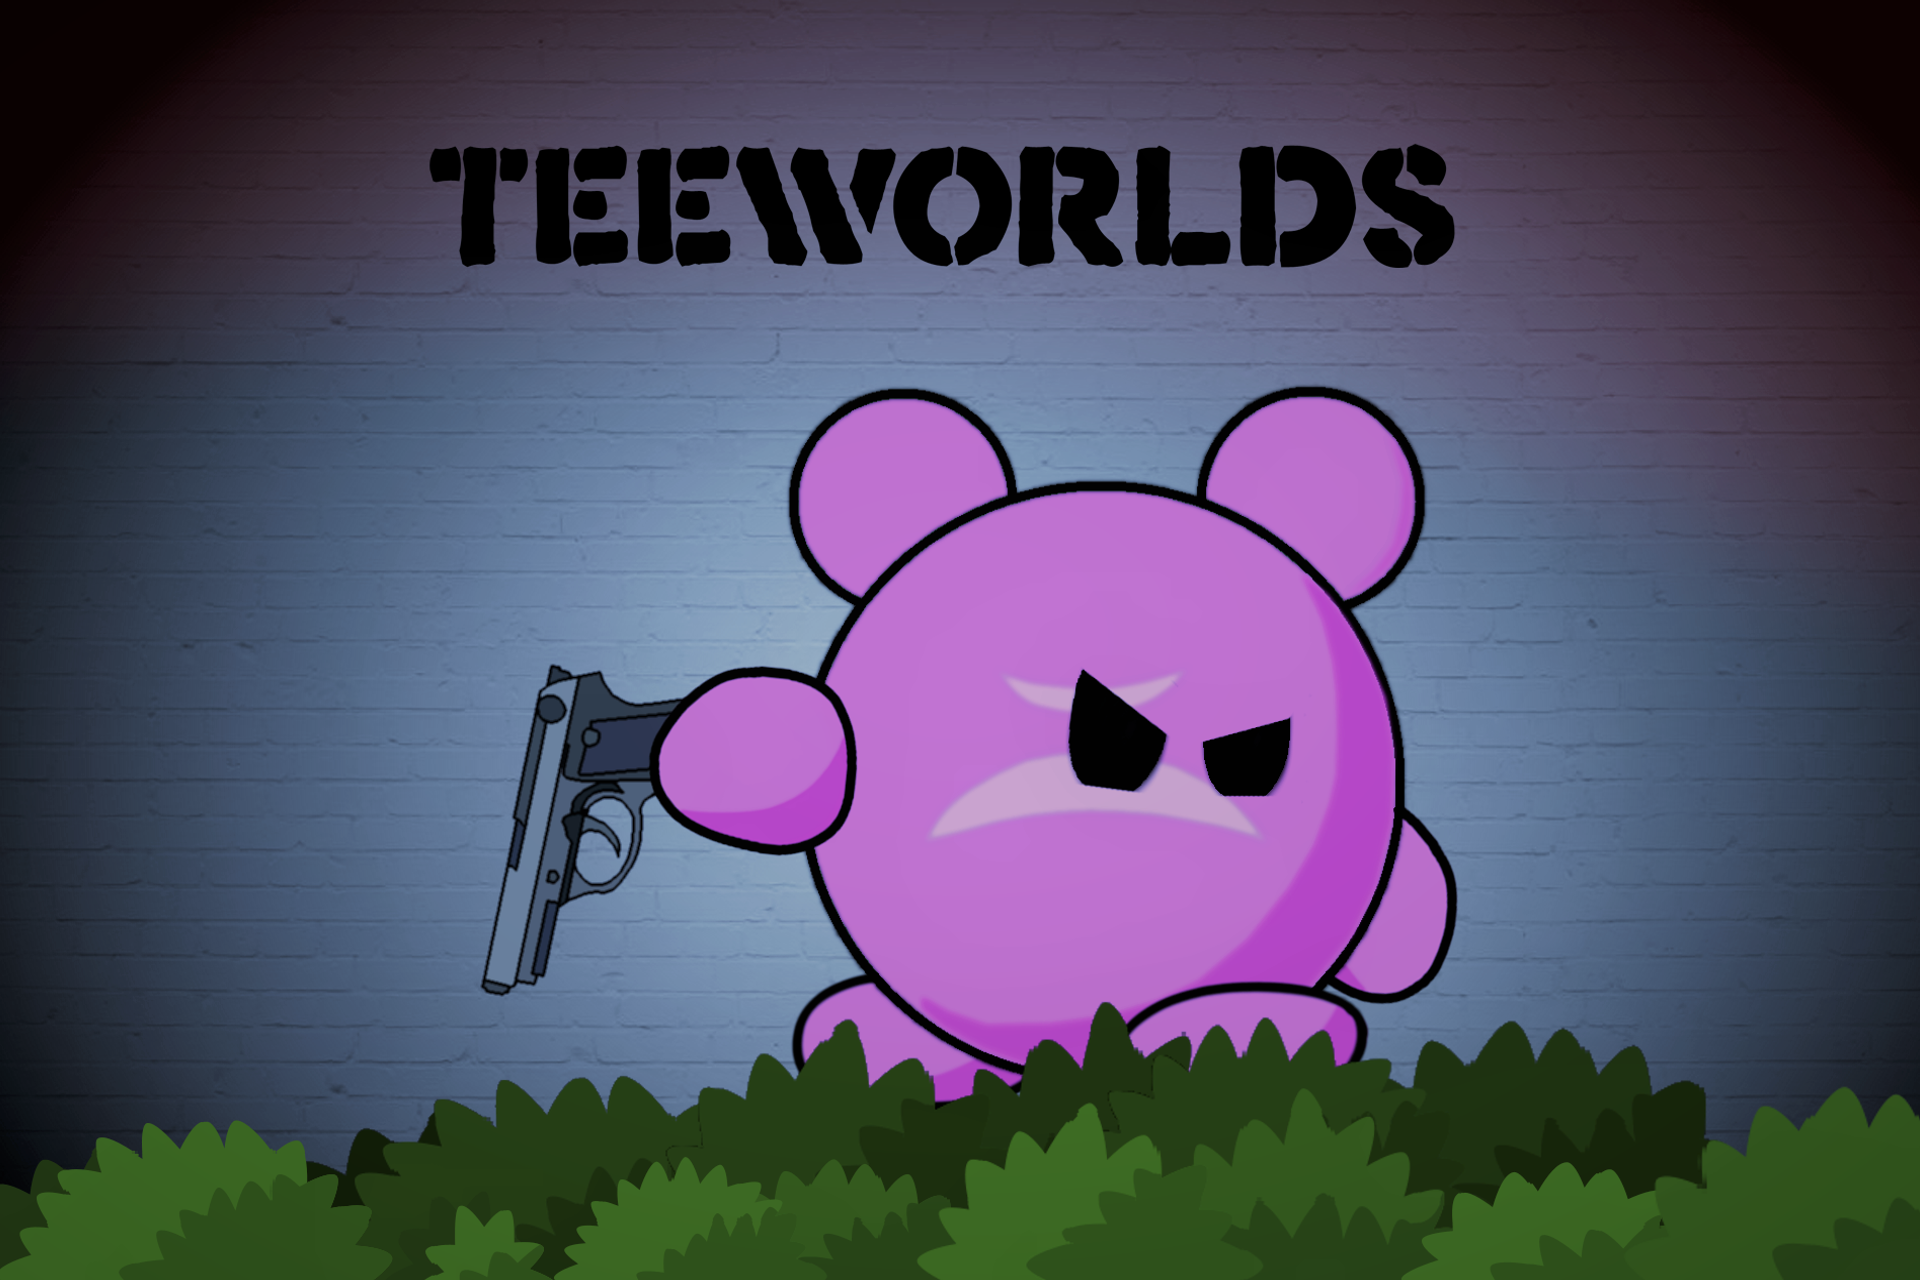 Teeworlds_kirby.png